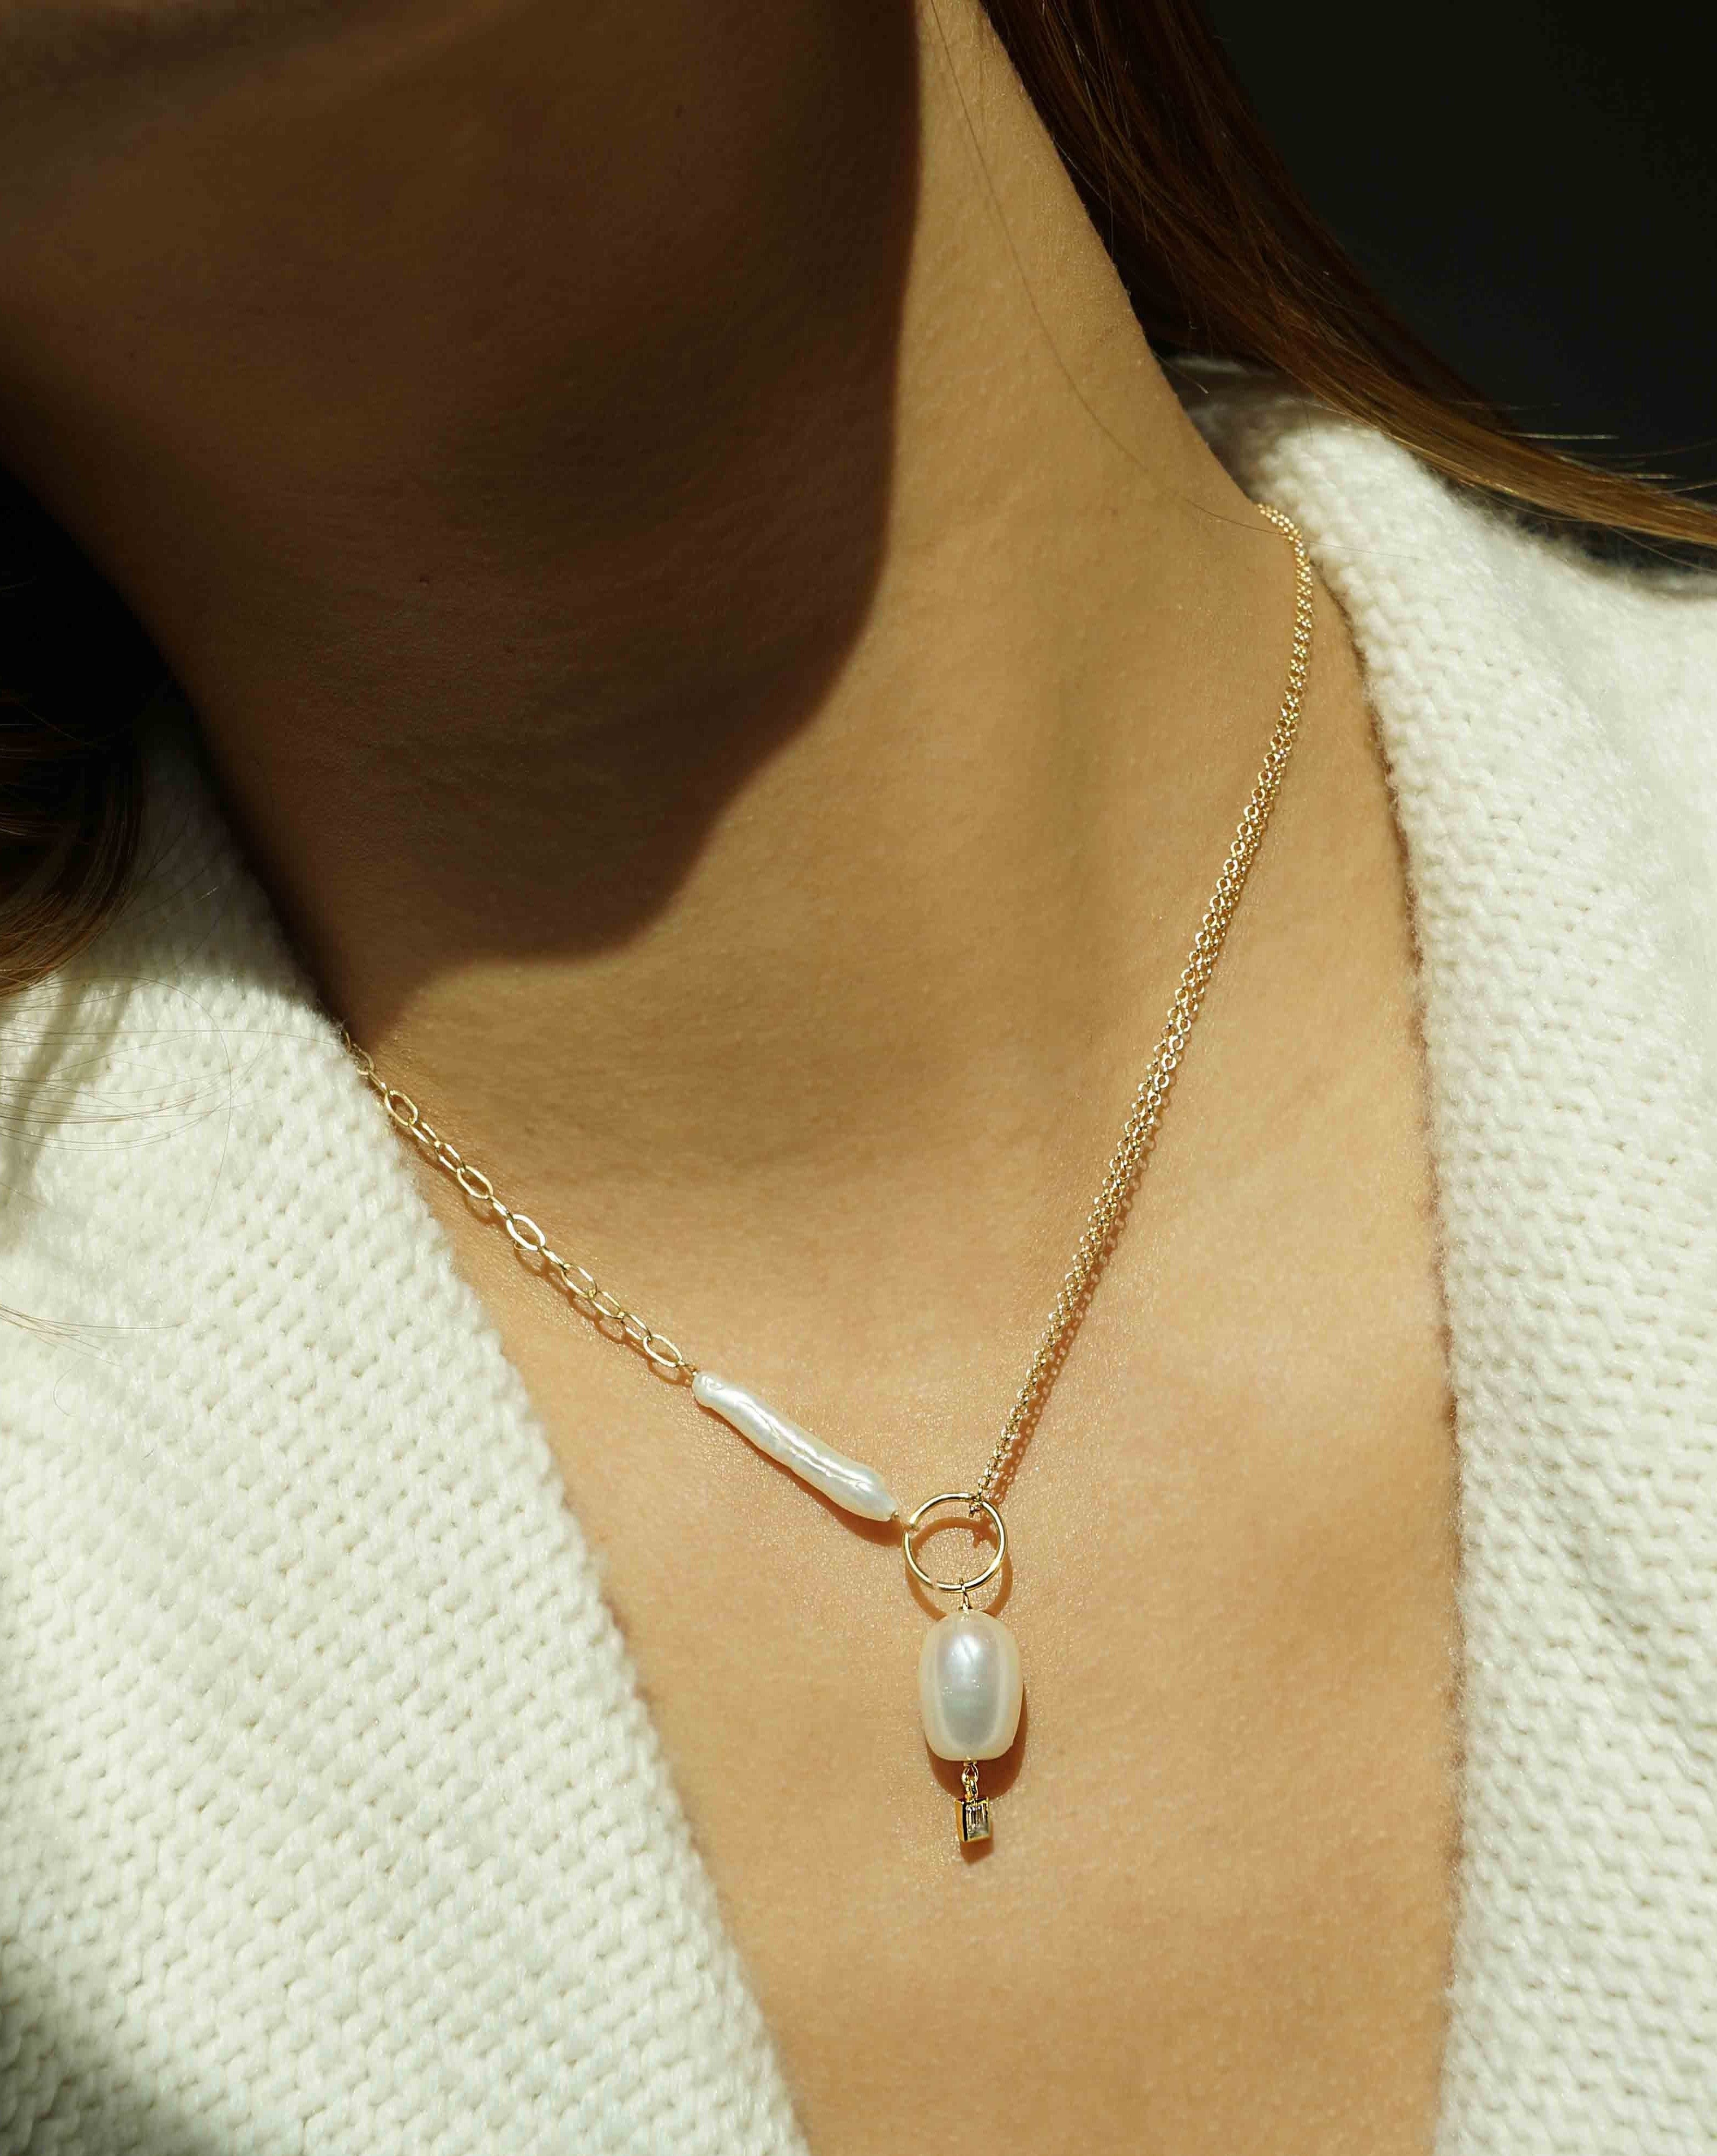 Darita Necklace by KOZAKH. A 16 to 18 inch adjustable length necklace in 14K Gold Filled, featuring a Biwa Pearl, a 6x9mm white oval shaped Pearl, and a 3mm rectangle cut Cubic Zirconia.